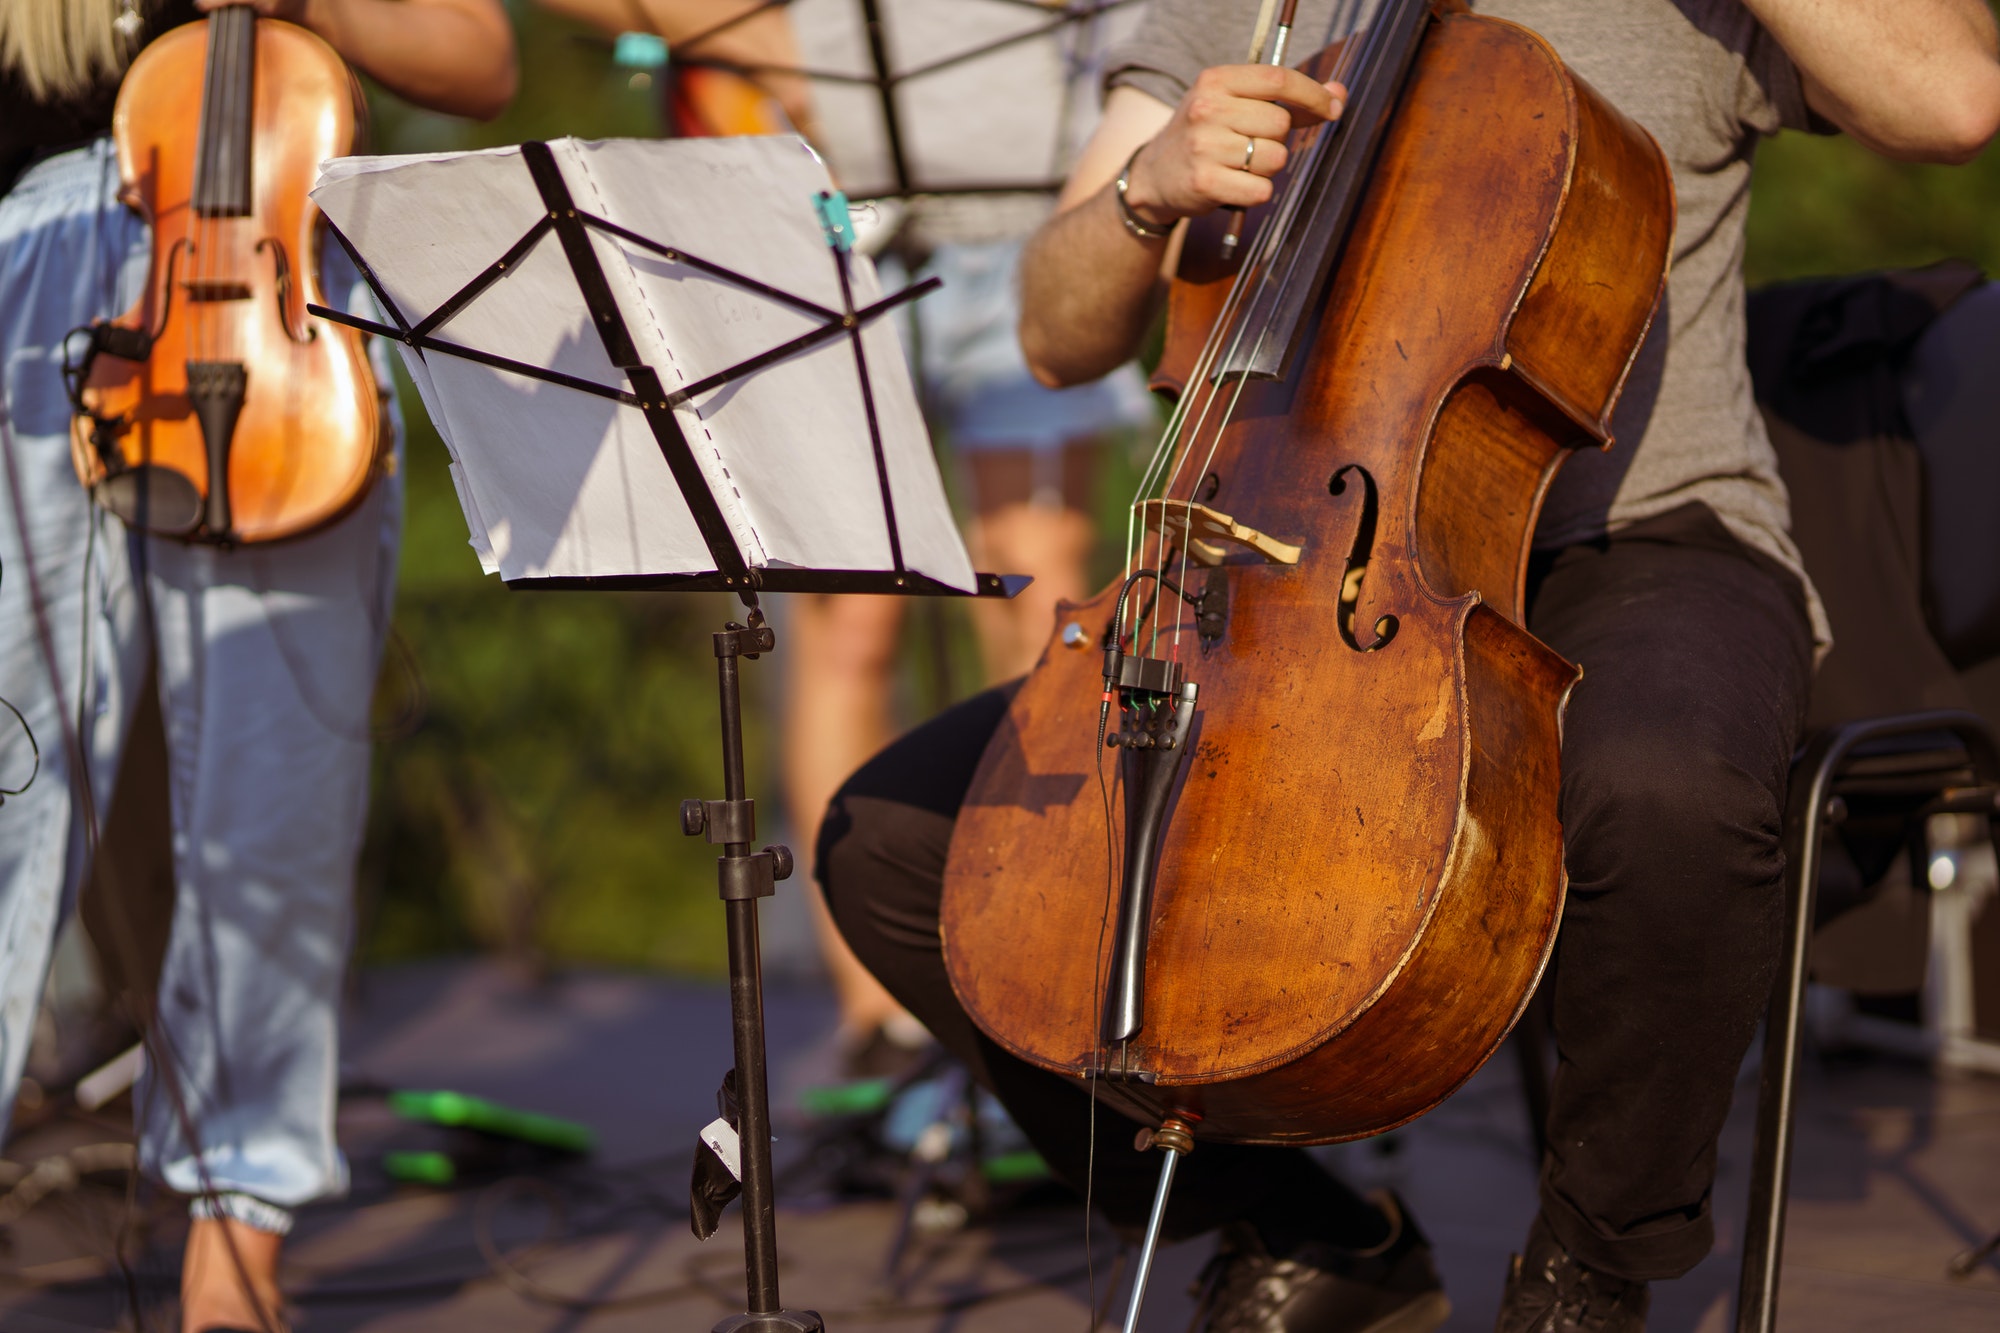 Male violoncellist playing in orchestra at outdoor concert